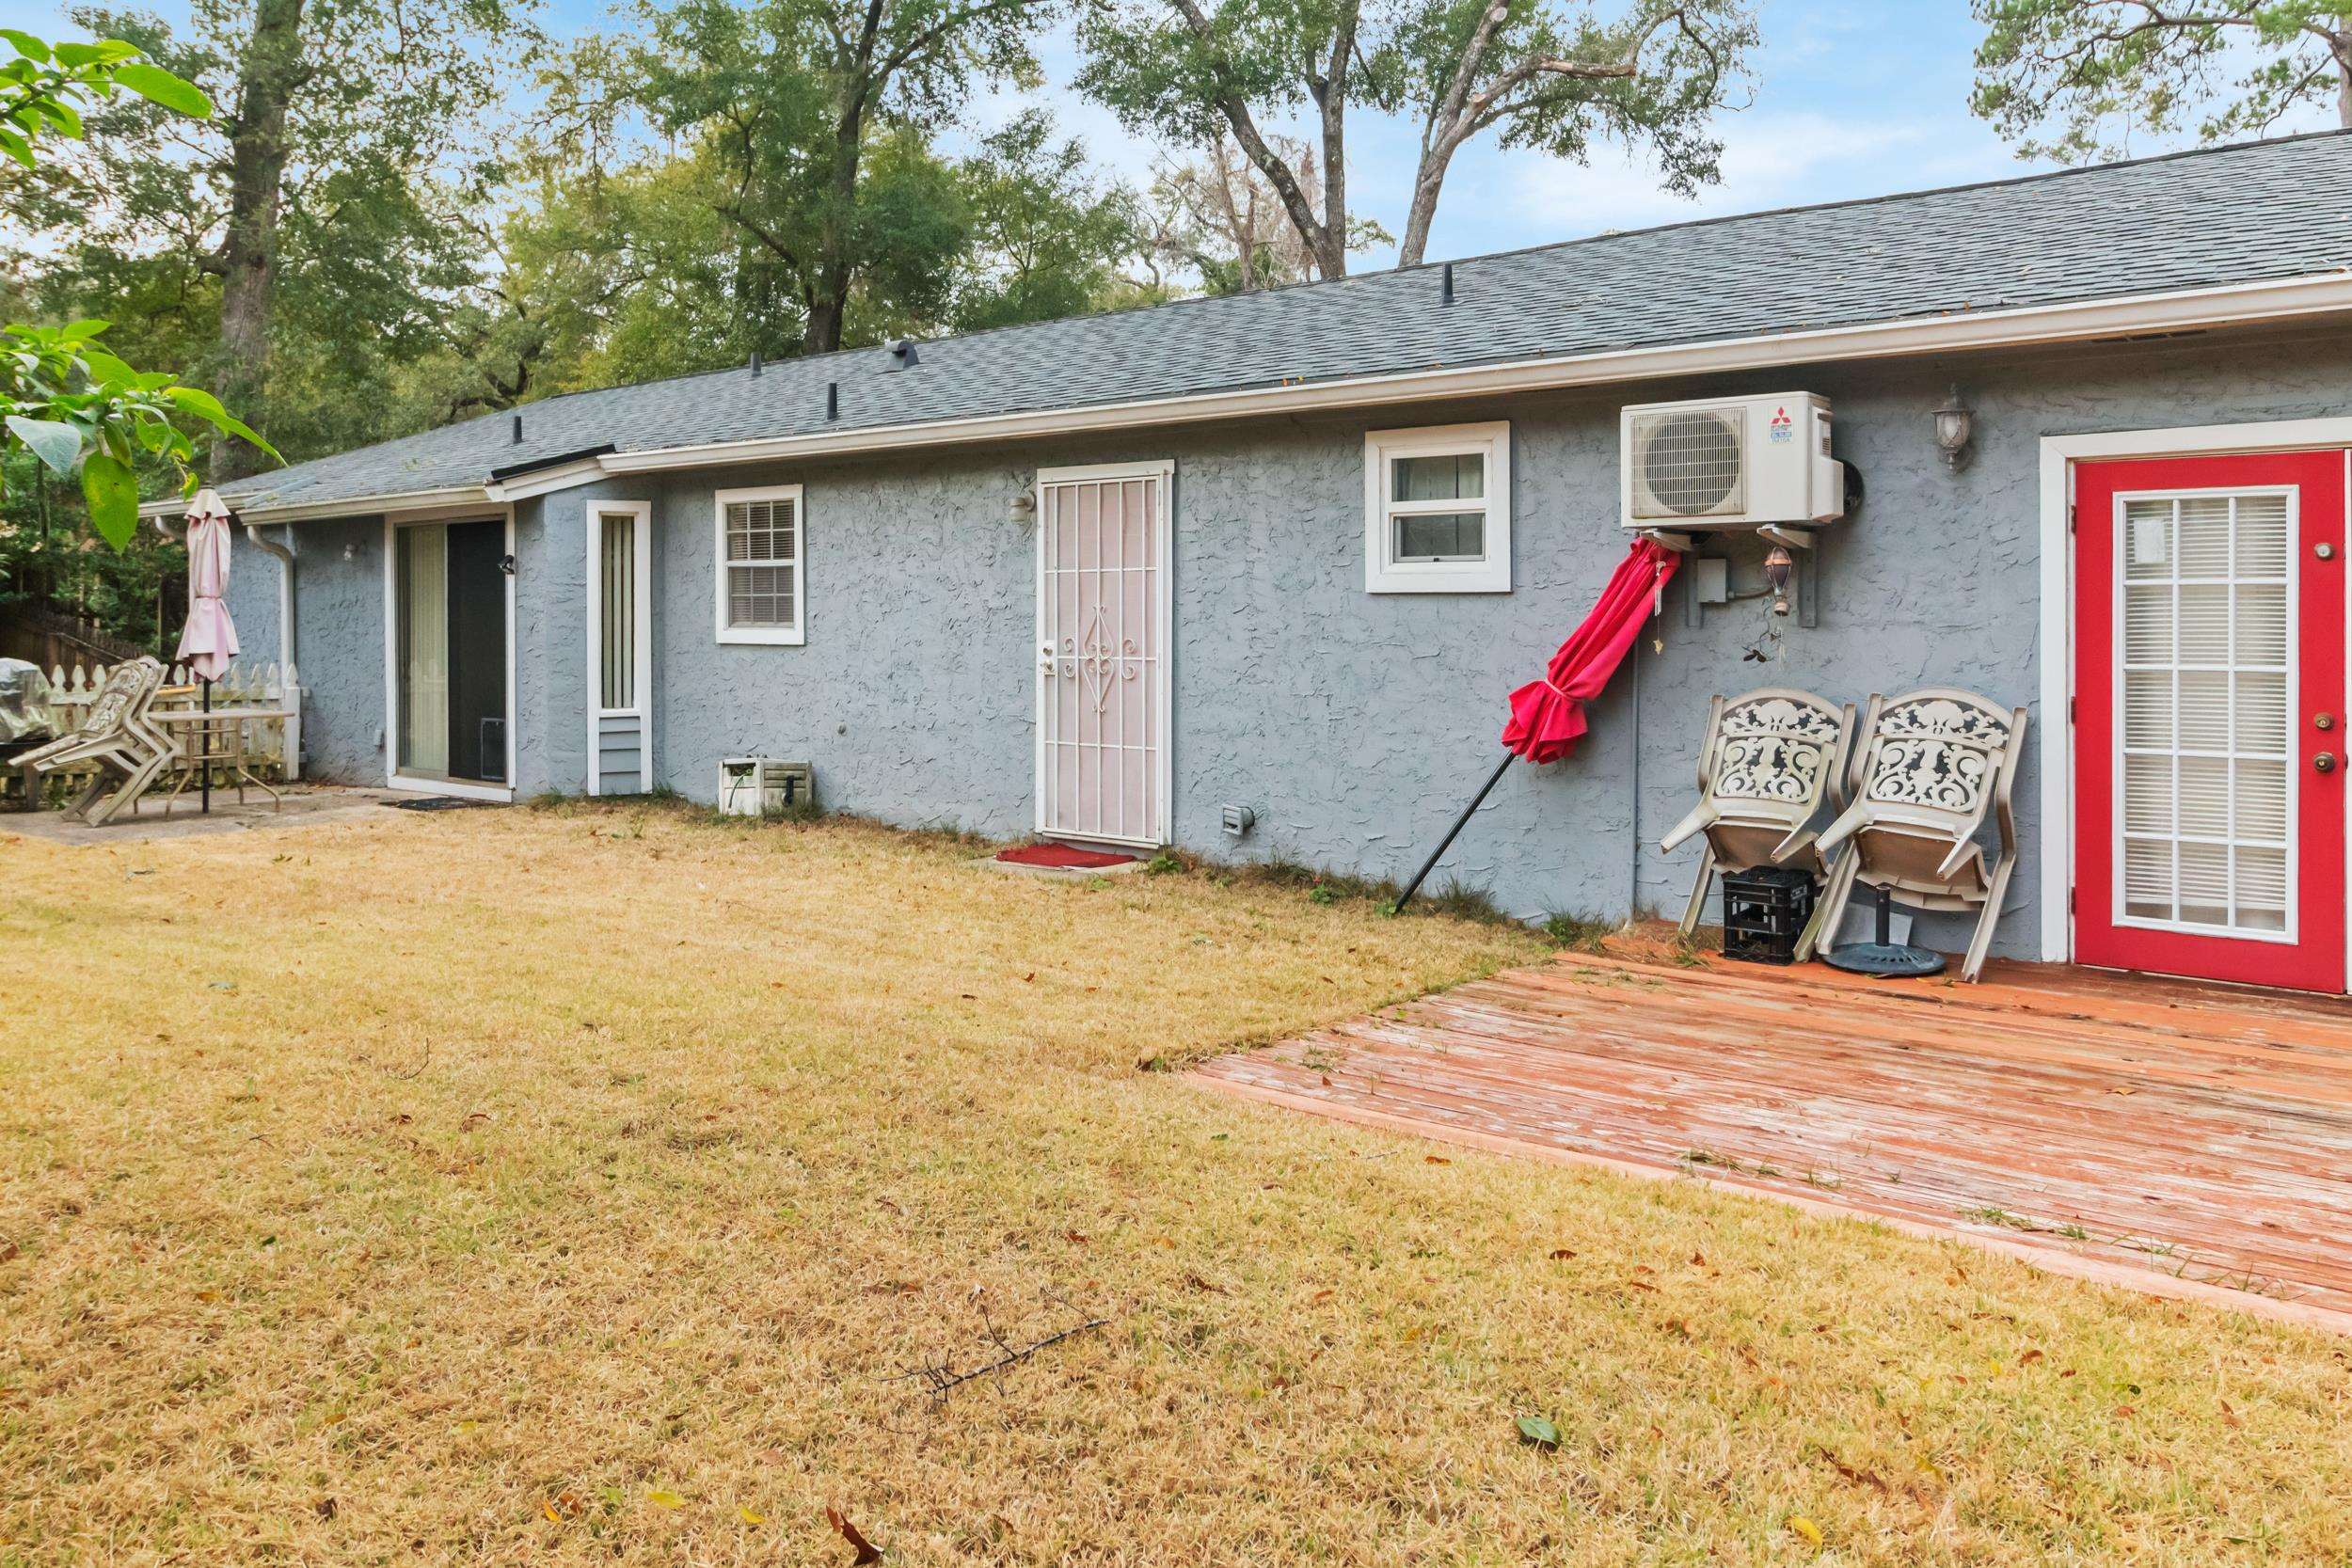 1903 Trapnell Street,TALLAHASSEE,Florida 32310,3 Bedrooms Bedrooms,2 BathroomsBathrooms,Detached single family,1903 Trapnell Street,367396